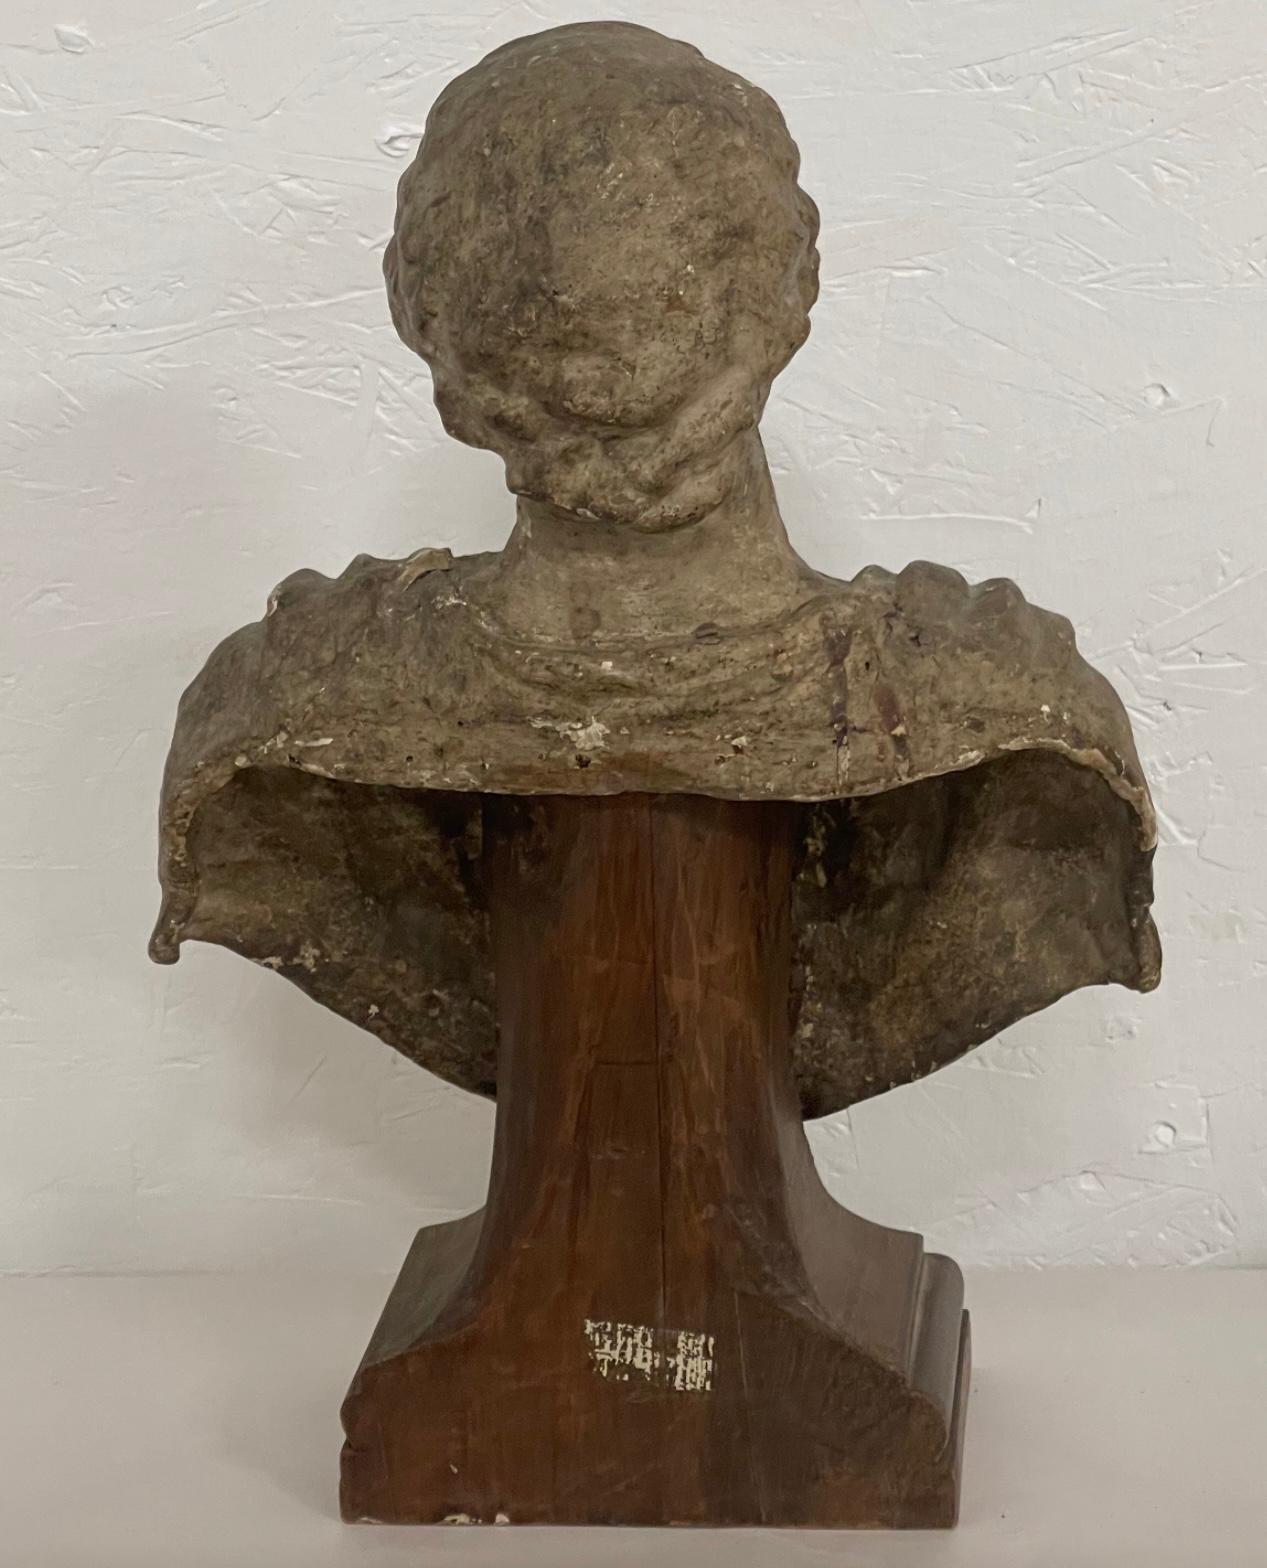 Neoclassical Revival 19th-C. French Neo-Classical Style Papier-mâché Bust